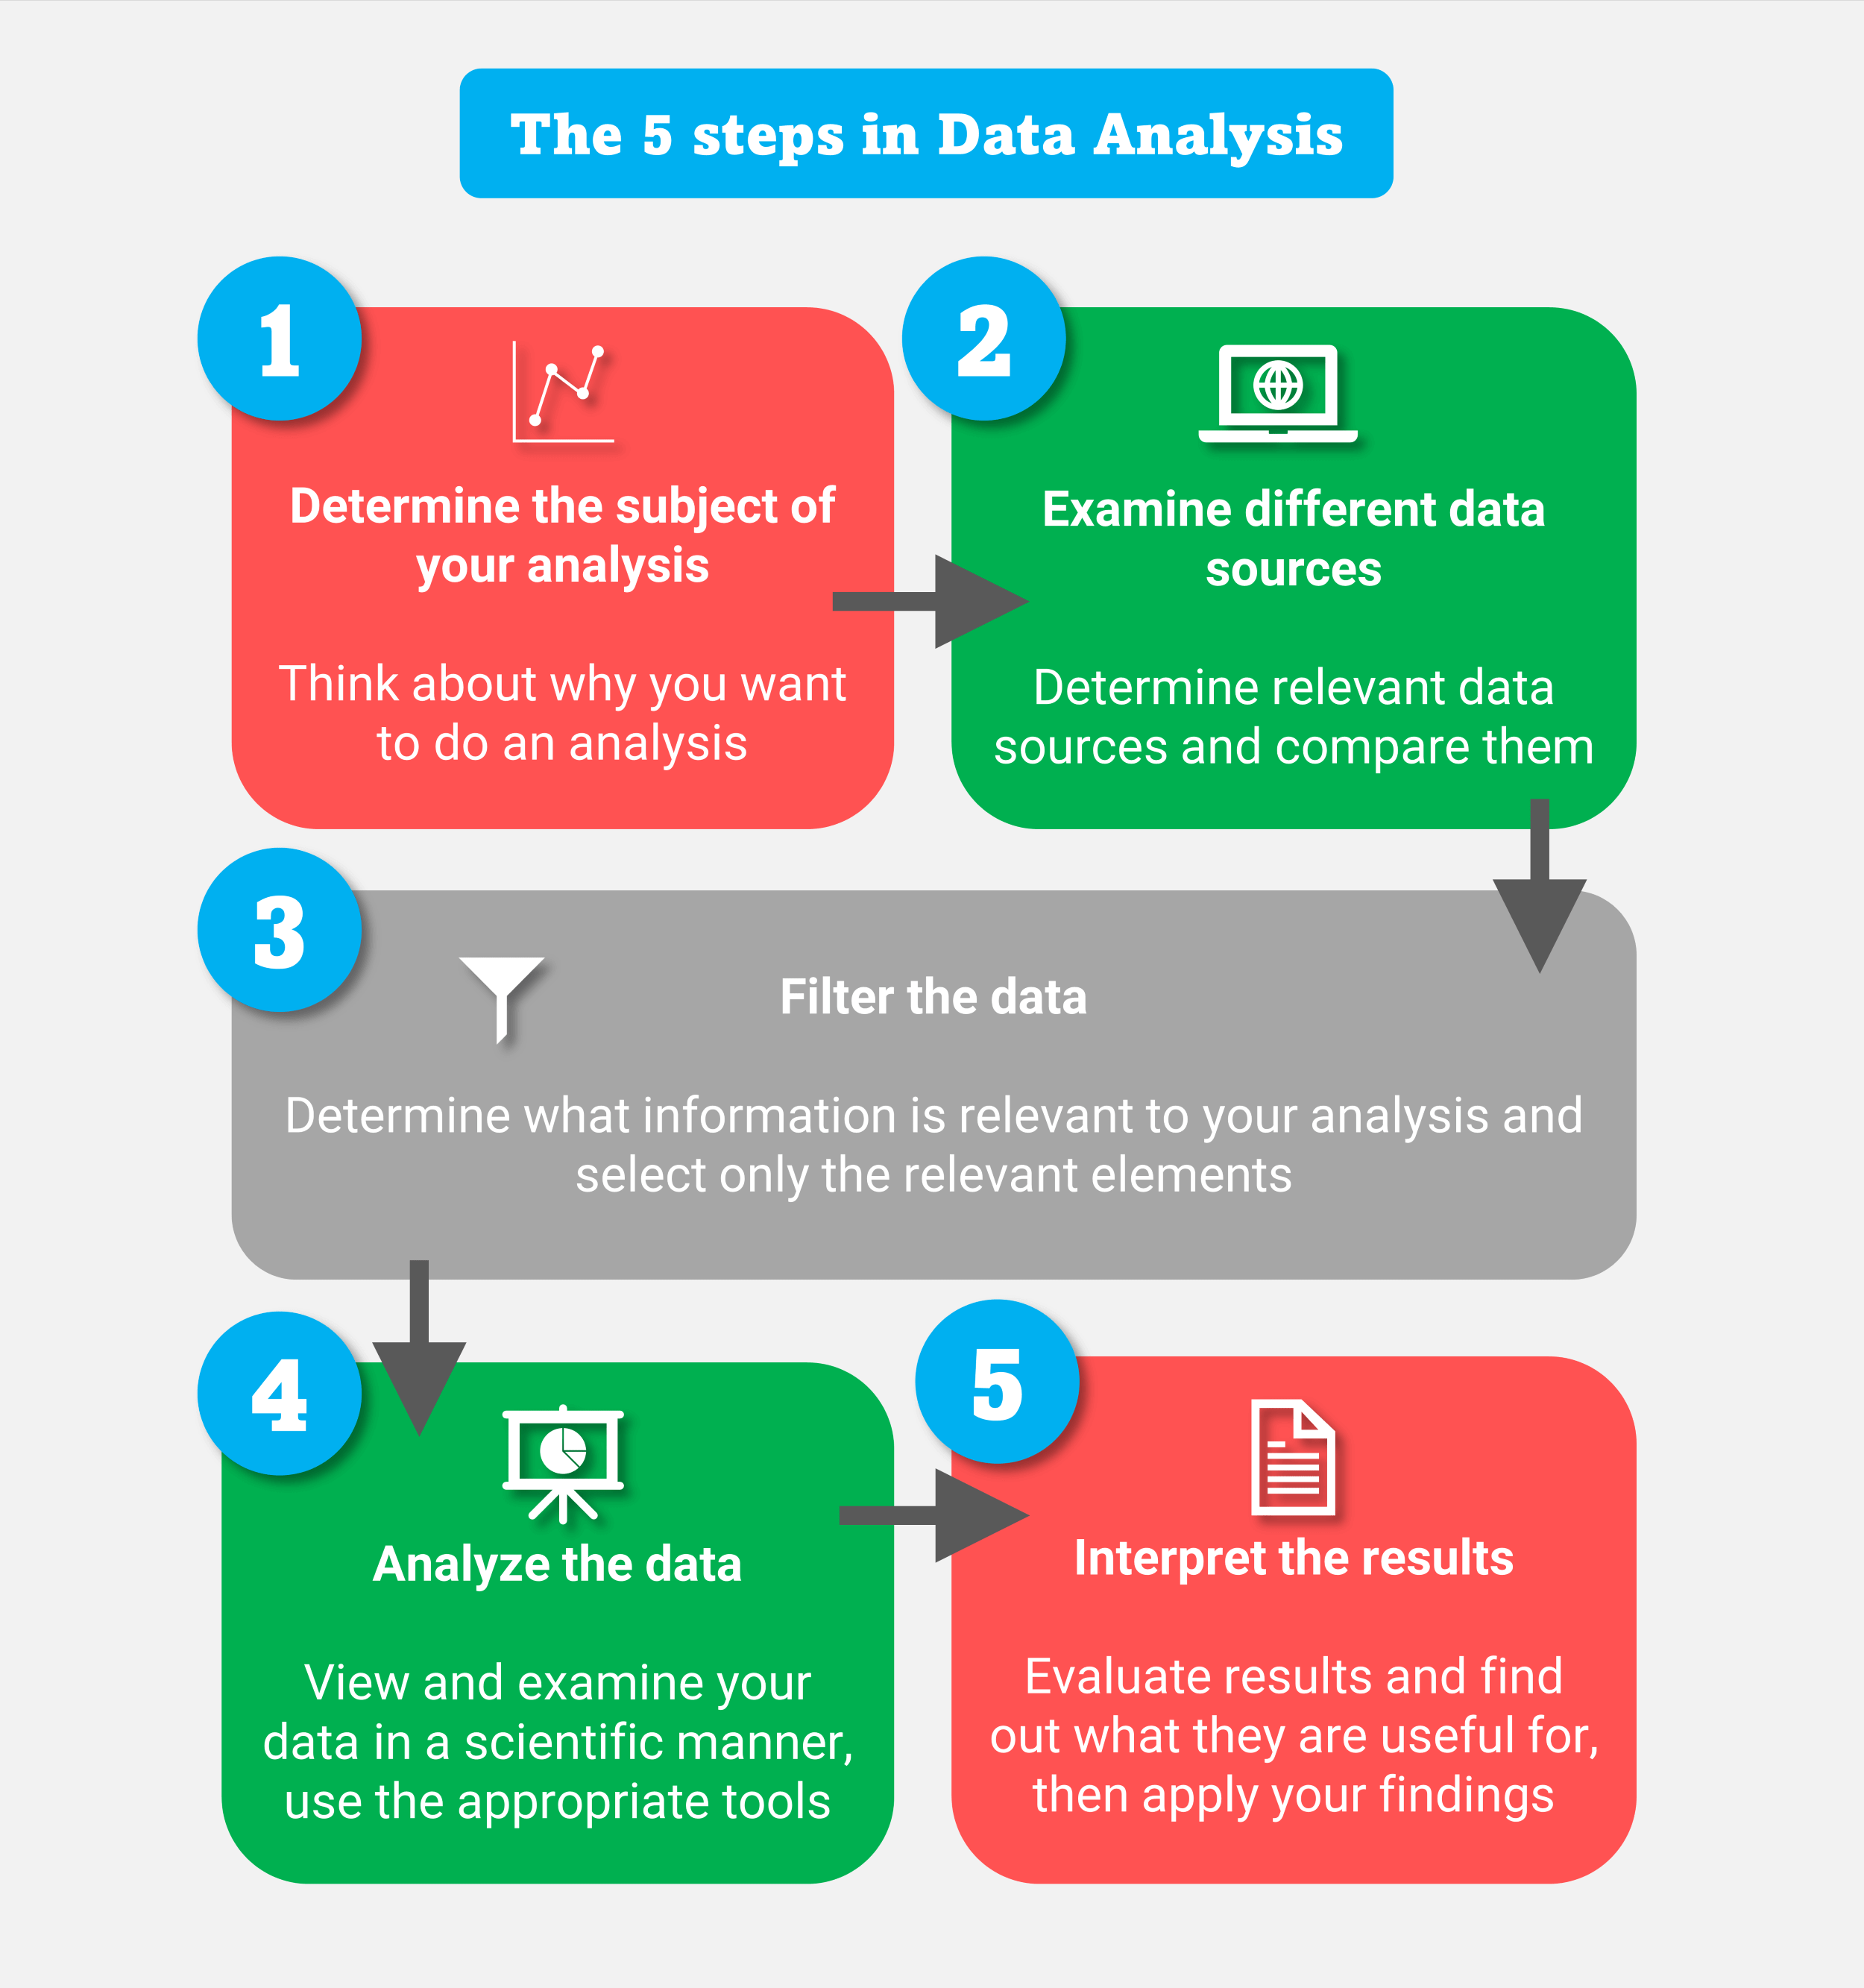 Essential types of data analysis methods and processes for